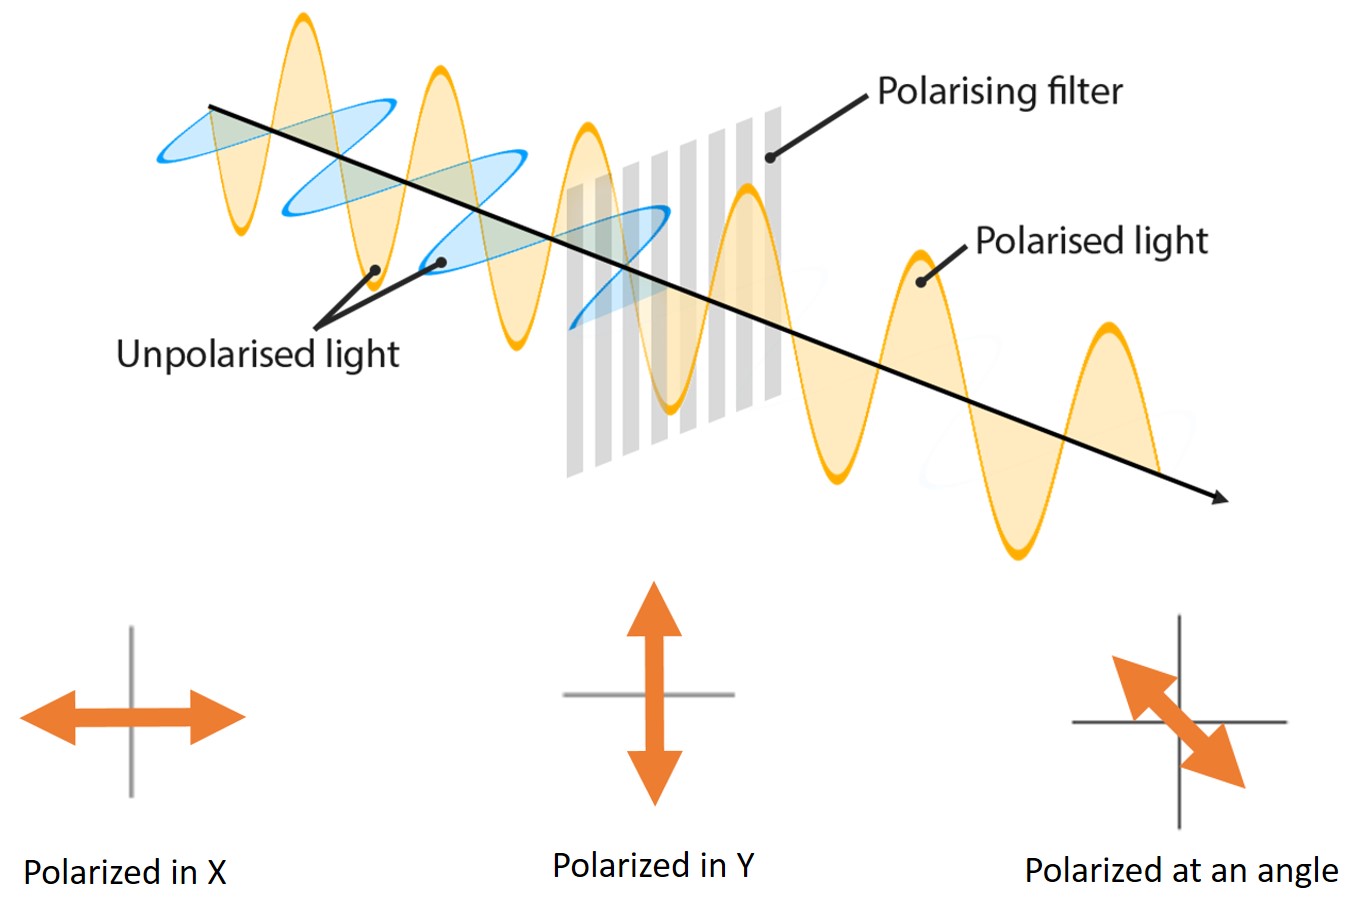 Light passing through a polarizing filter has all of its components extinguished except for the component parallel to the direction of the filter